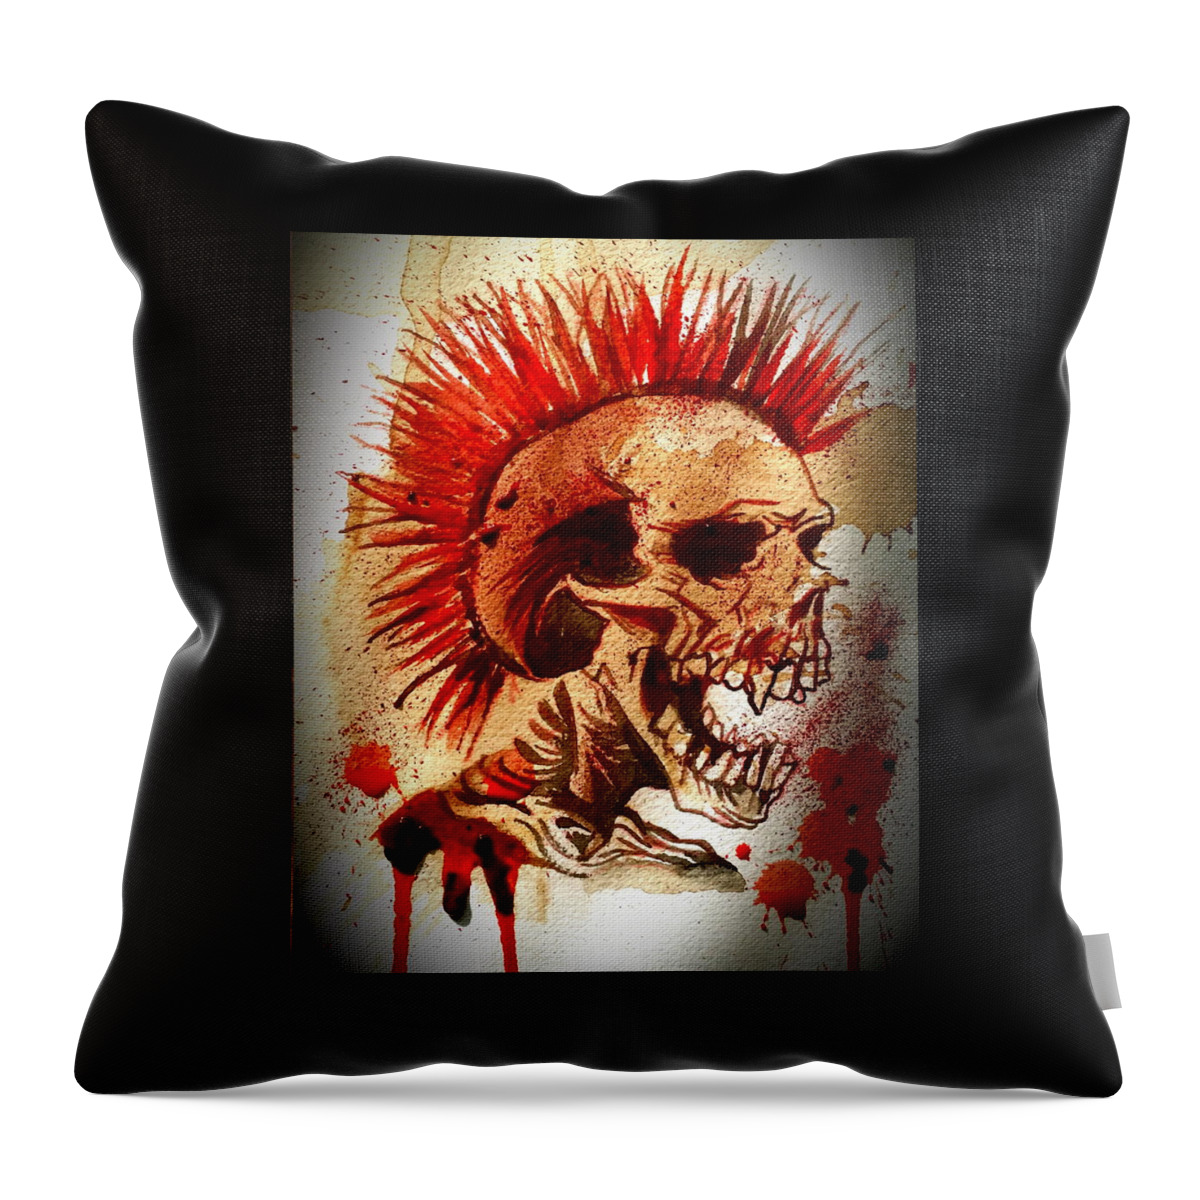  Throw Pillow featuring the painting Exploited Skull by Ryan Almighty